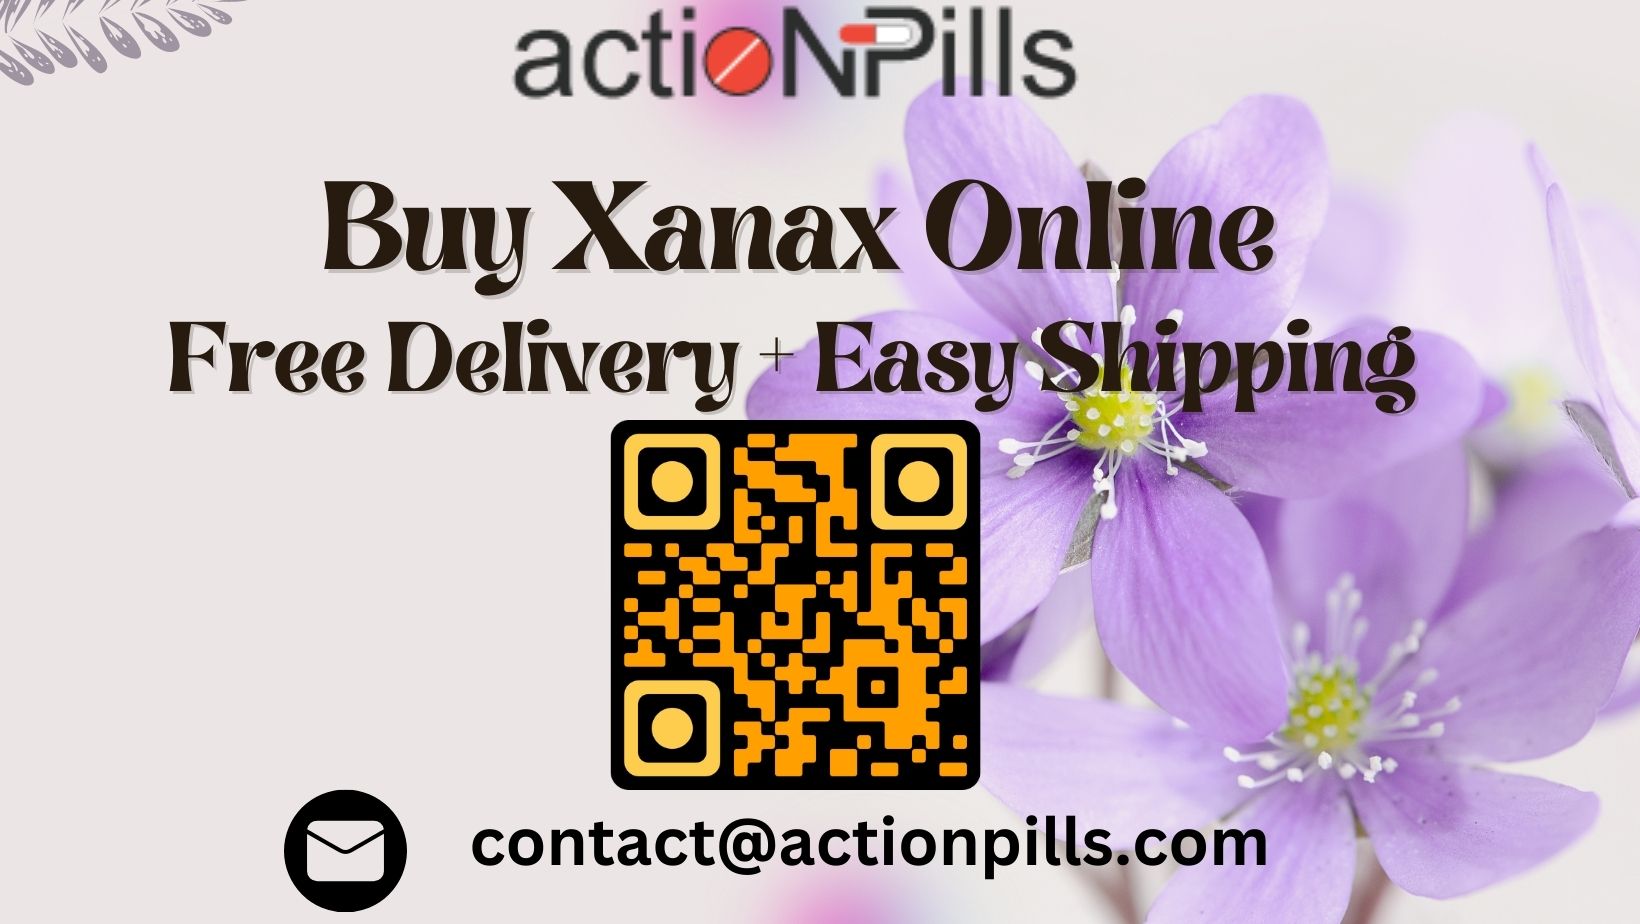 How To Buy Xanax Online {1mg_2mg_XR 3mg_} Recover Your Health And Remove Anxiety